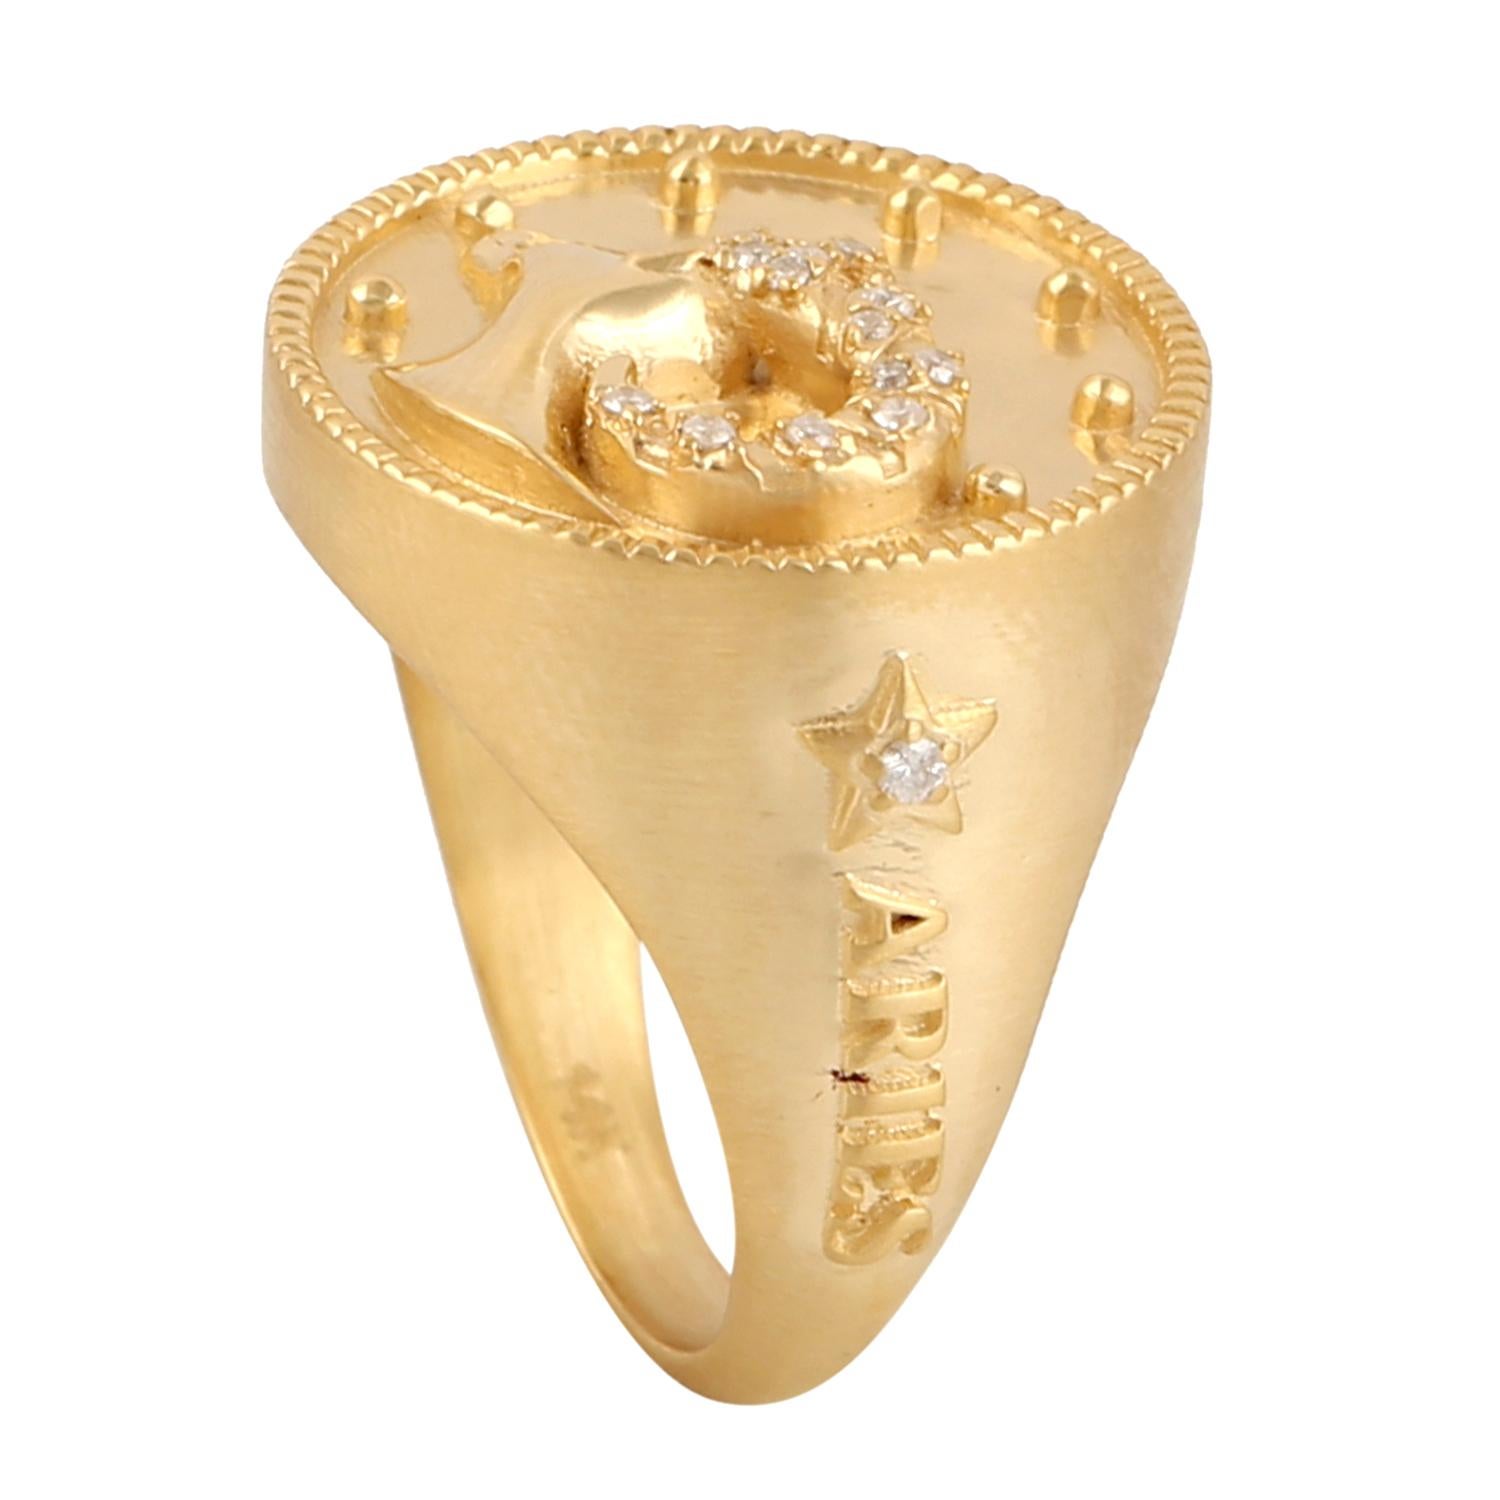 Artisan Aries Zodiac Ring With Pave Diamonds Made in 14k Yellow Gold For Sale